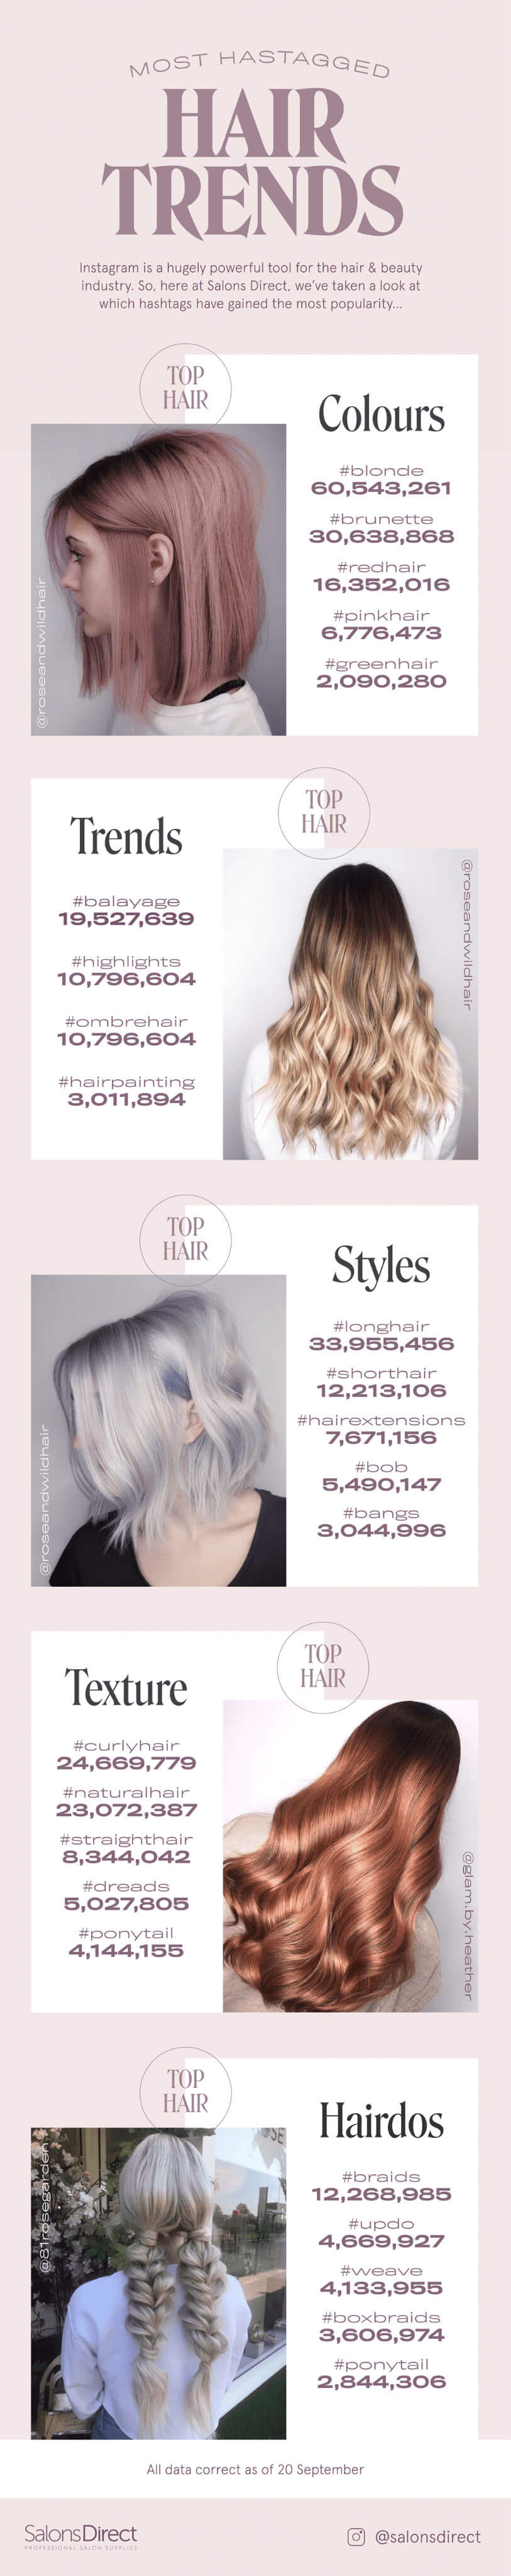 the most hashtagged hair trends on Instagram